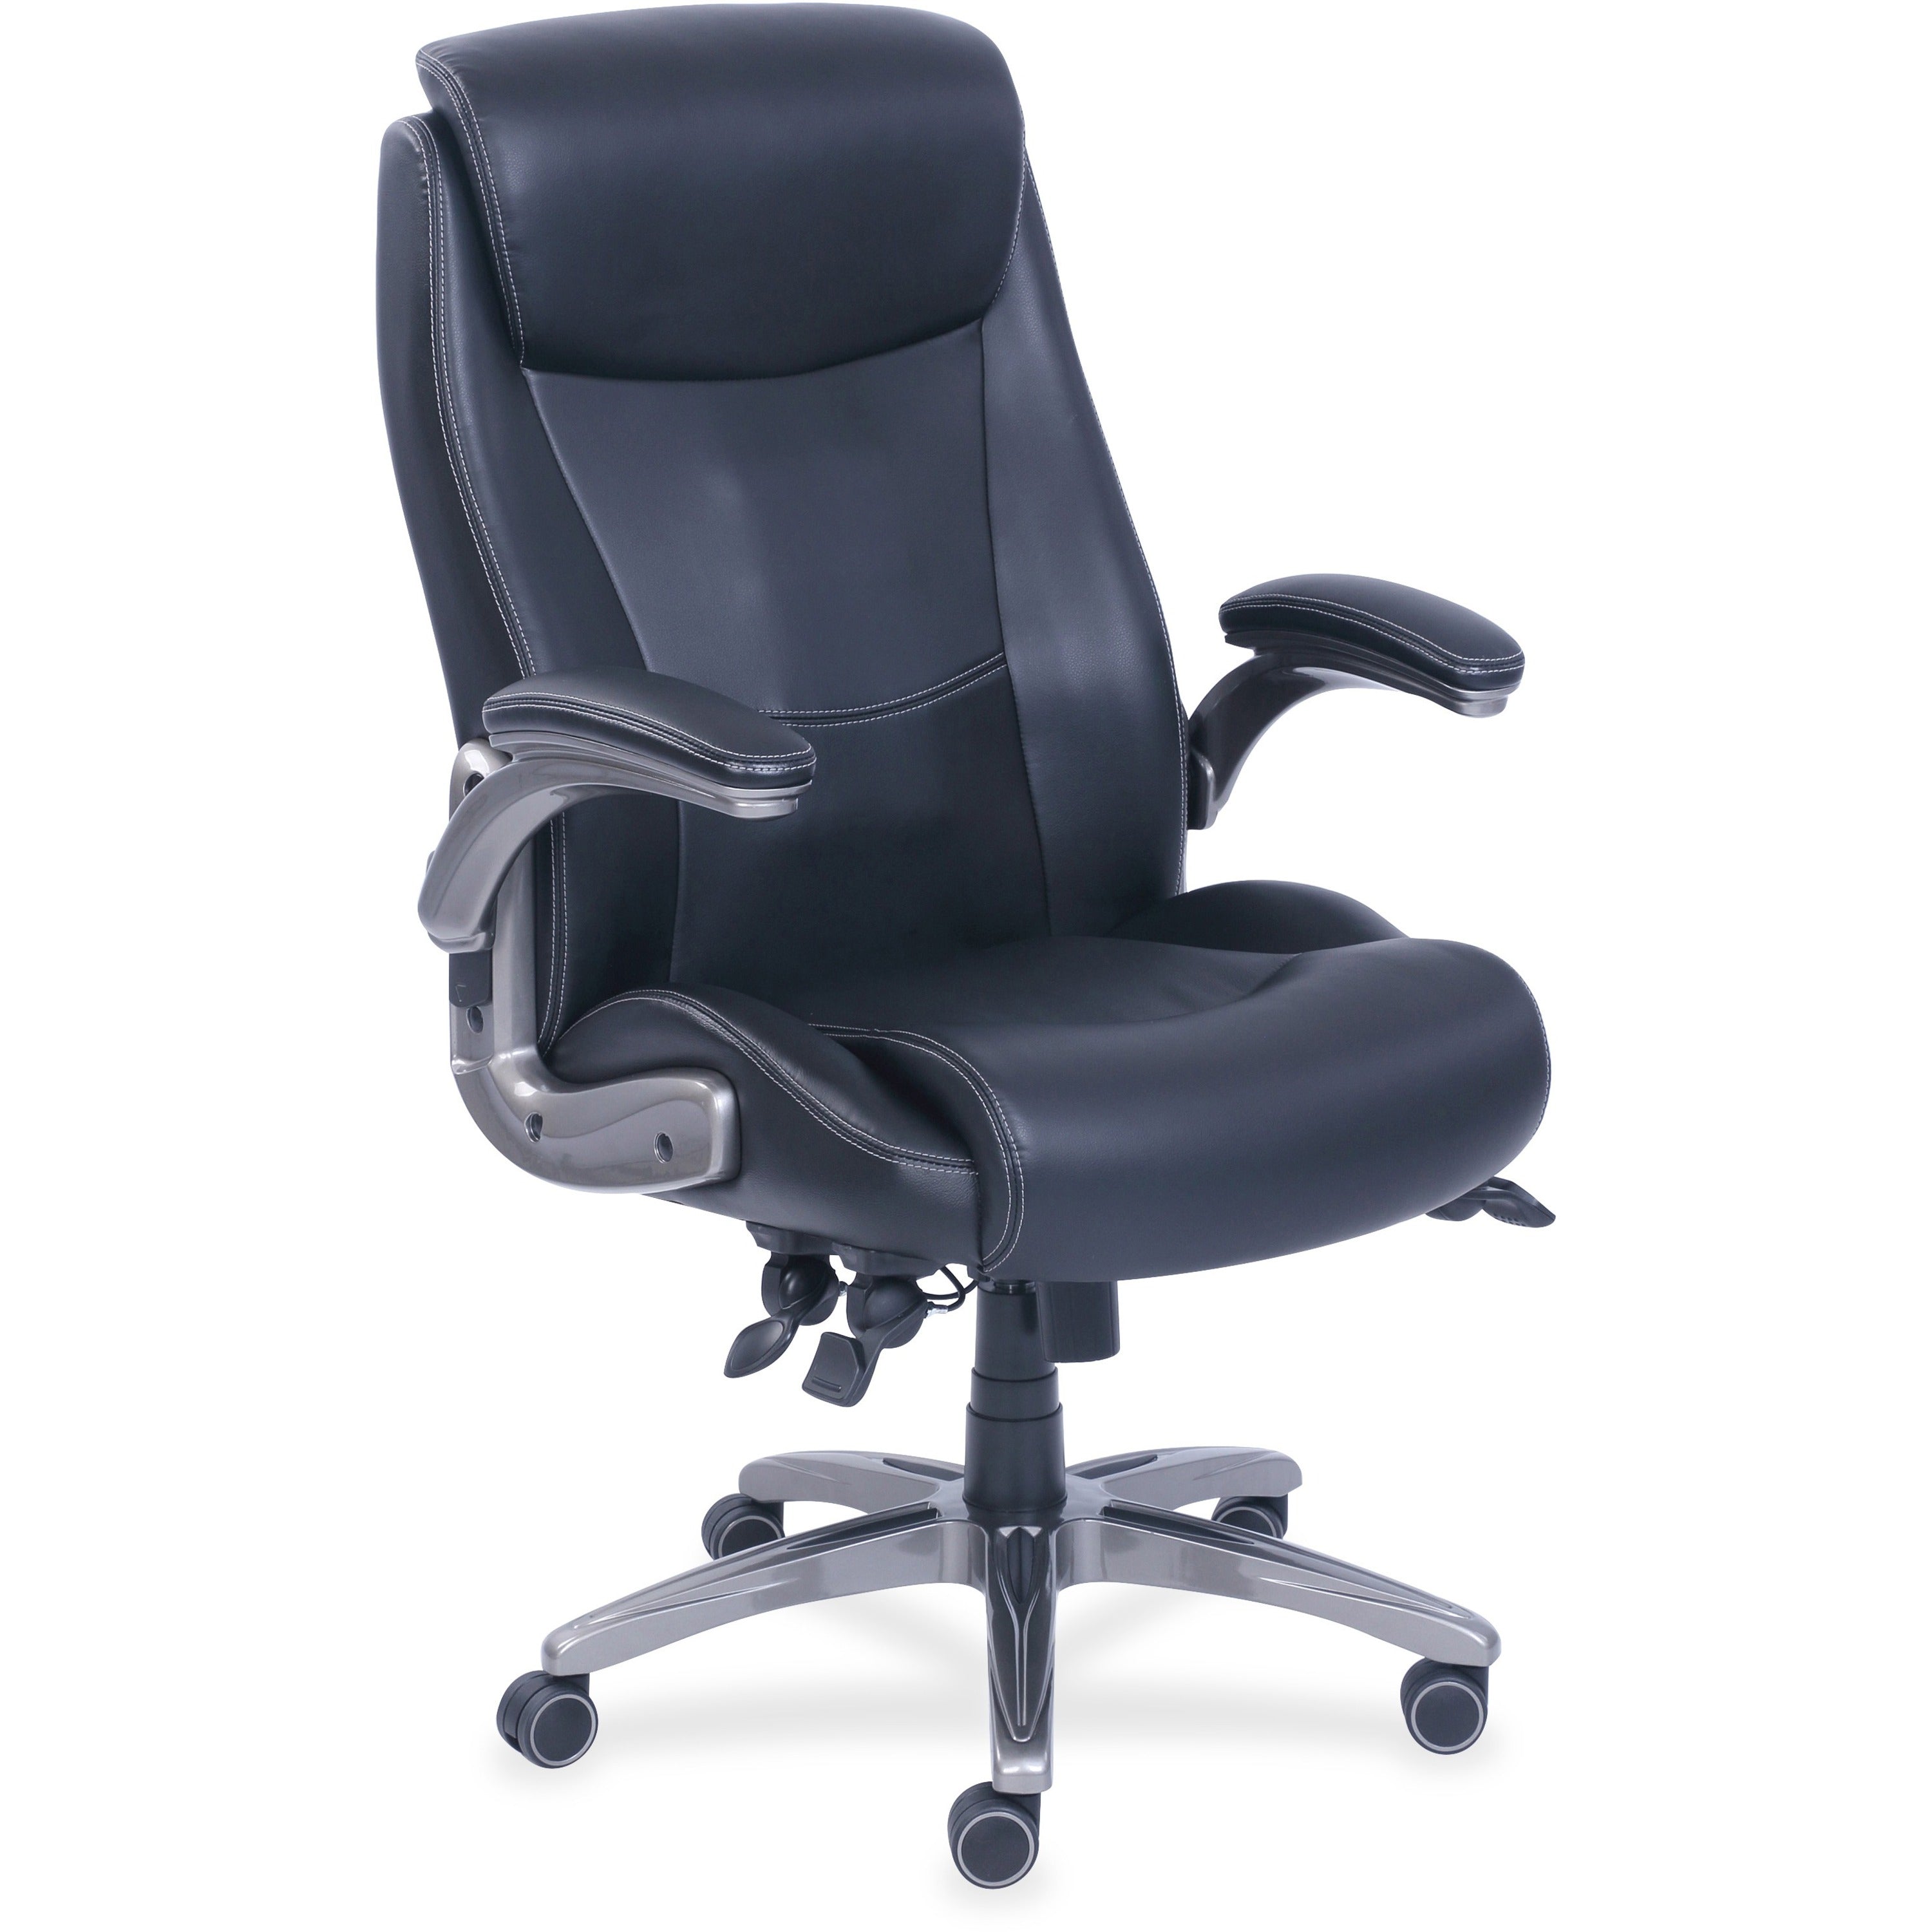 lorell-wellness-by-design-revive-executive-office-chair-black-bonded-leather-seat-black-bonded-leather-back-5-star-base-1-each_llr48730 - 1